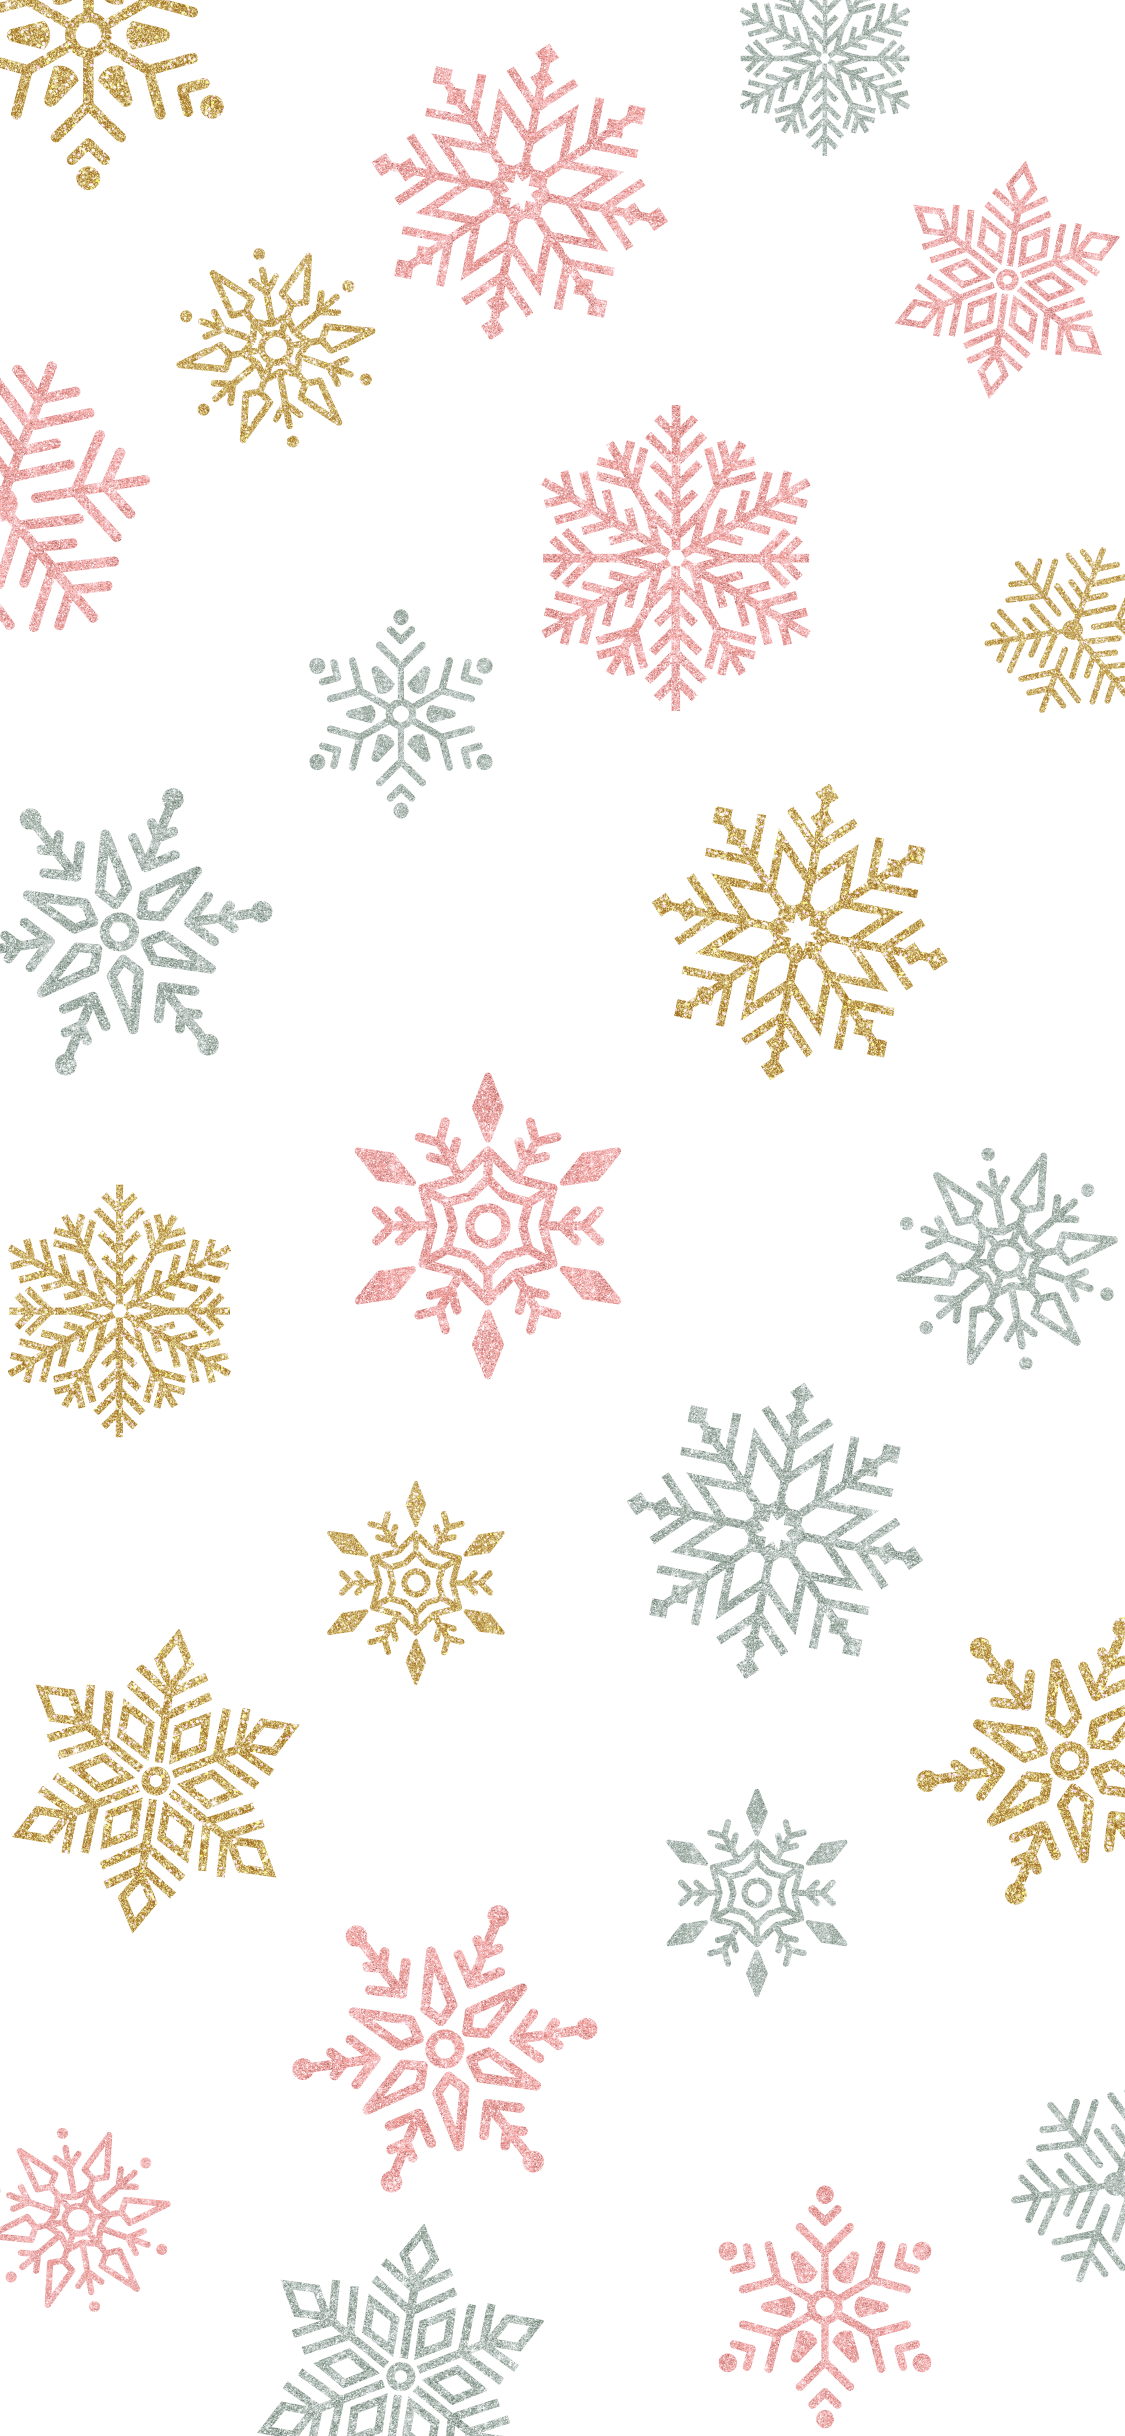 Winter Themed iPhone Wallpaper 2019 and Ivory